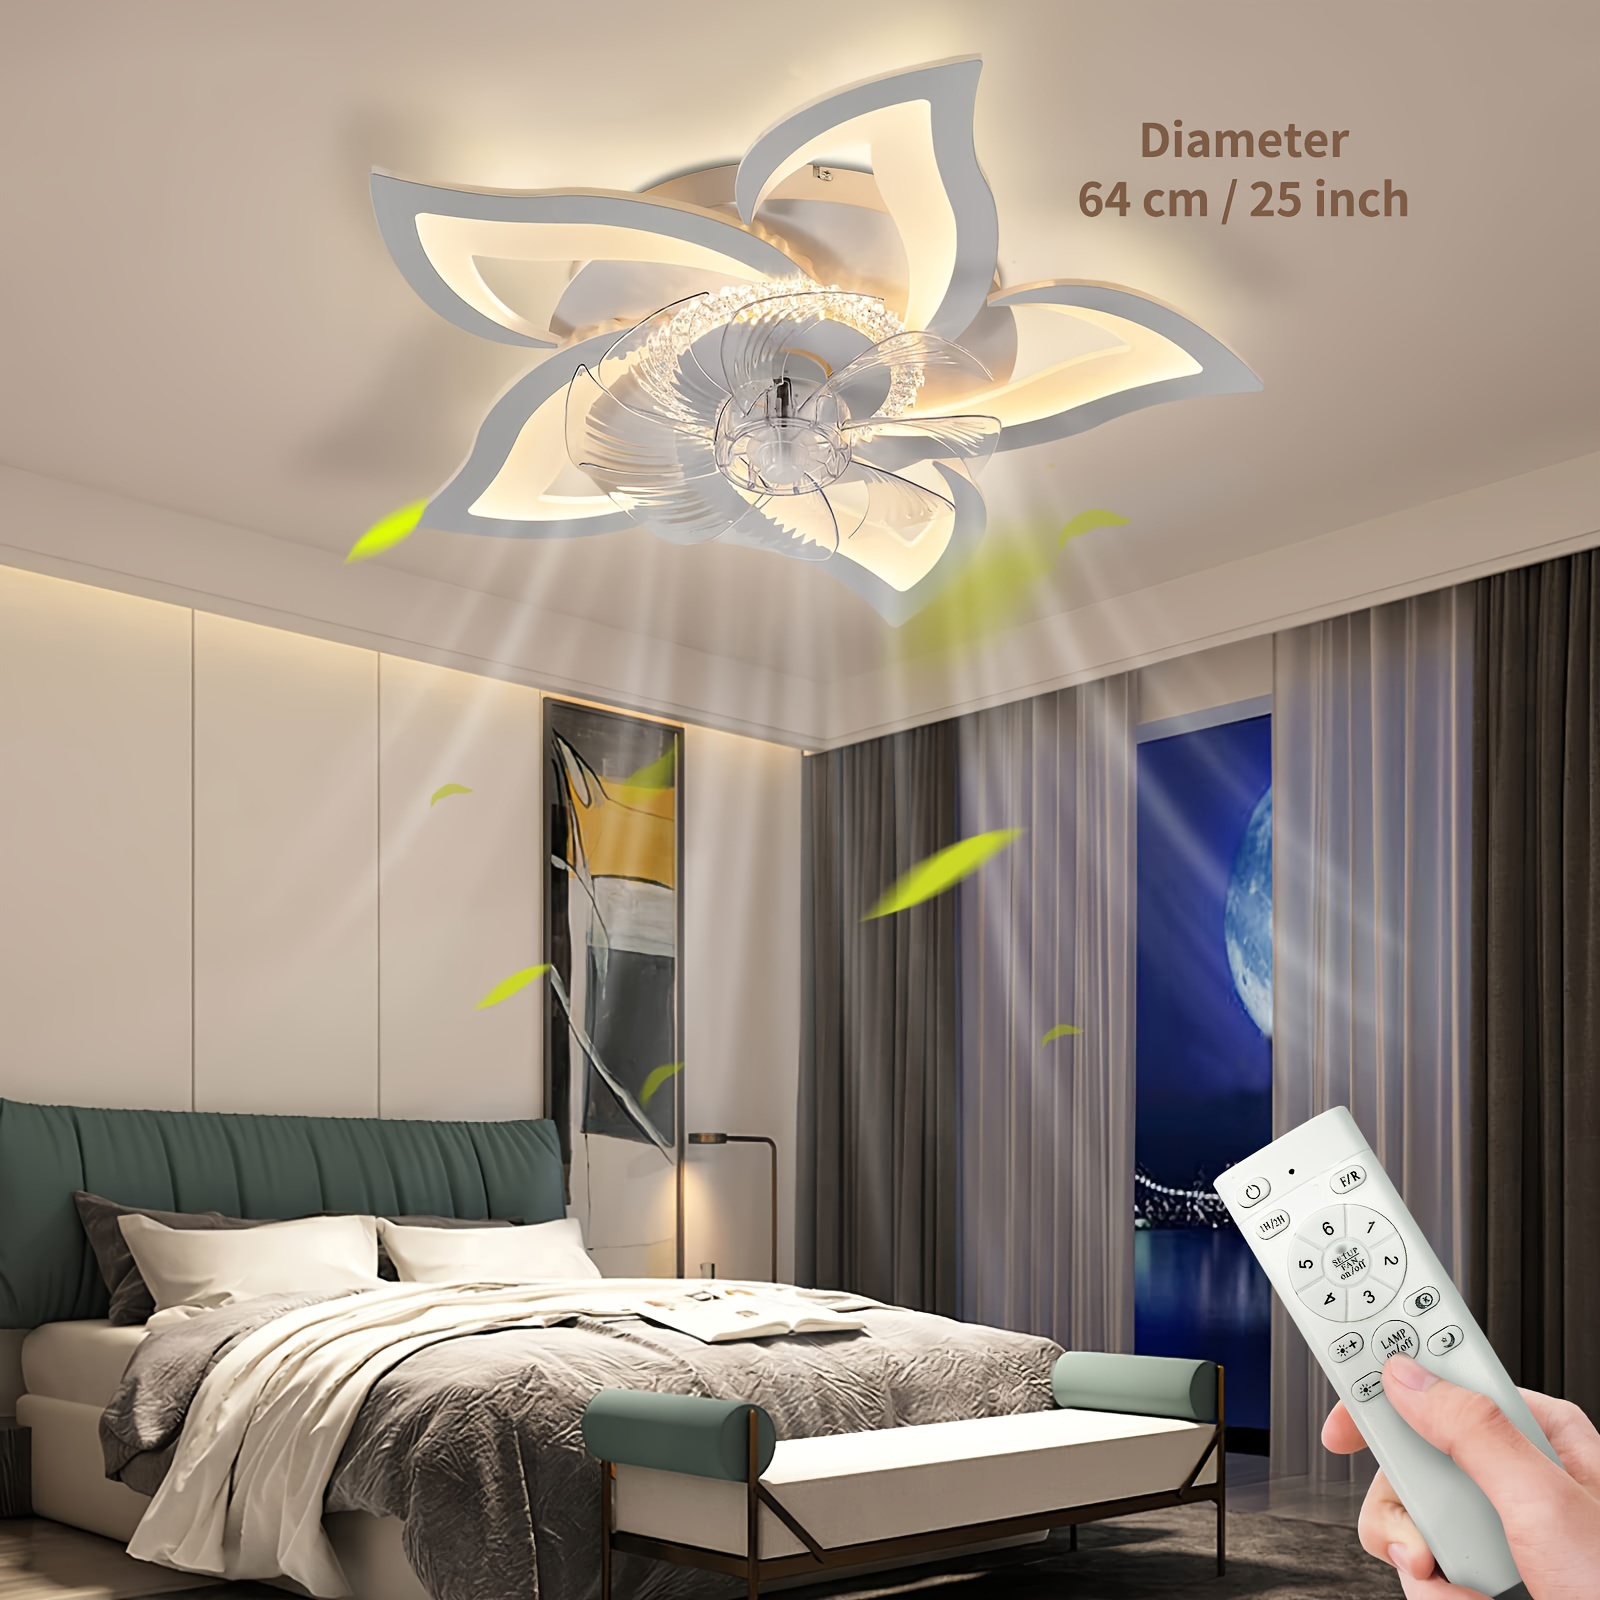 

1pc Ceiling Fan With Light - Modern Ceiling Fan With Smart Led Light And Remote Control, 6 Speeds, 3 Colors, Dimmable For Living Room, Bedroom, And Kitchen, Mh-dx-fan